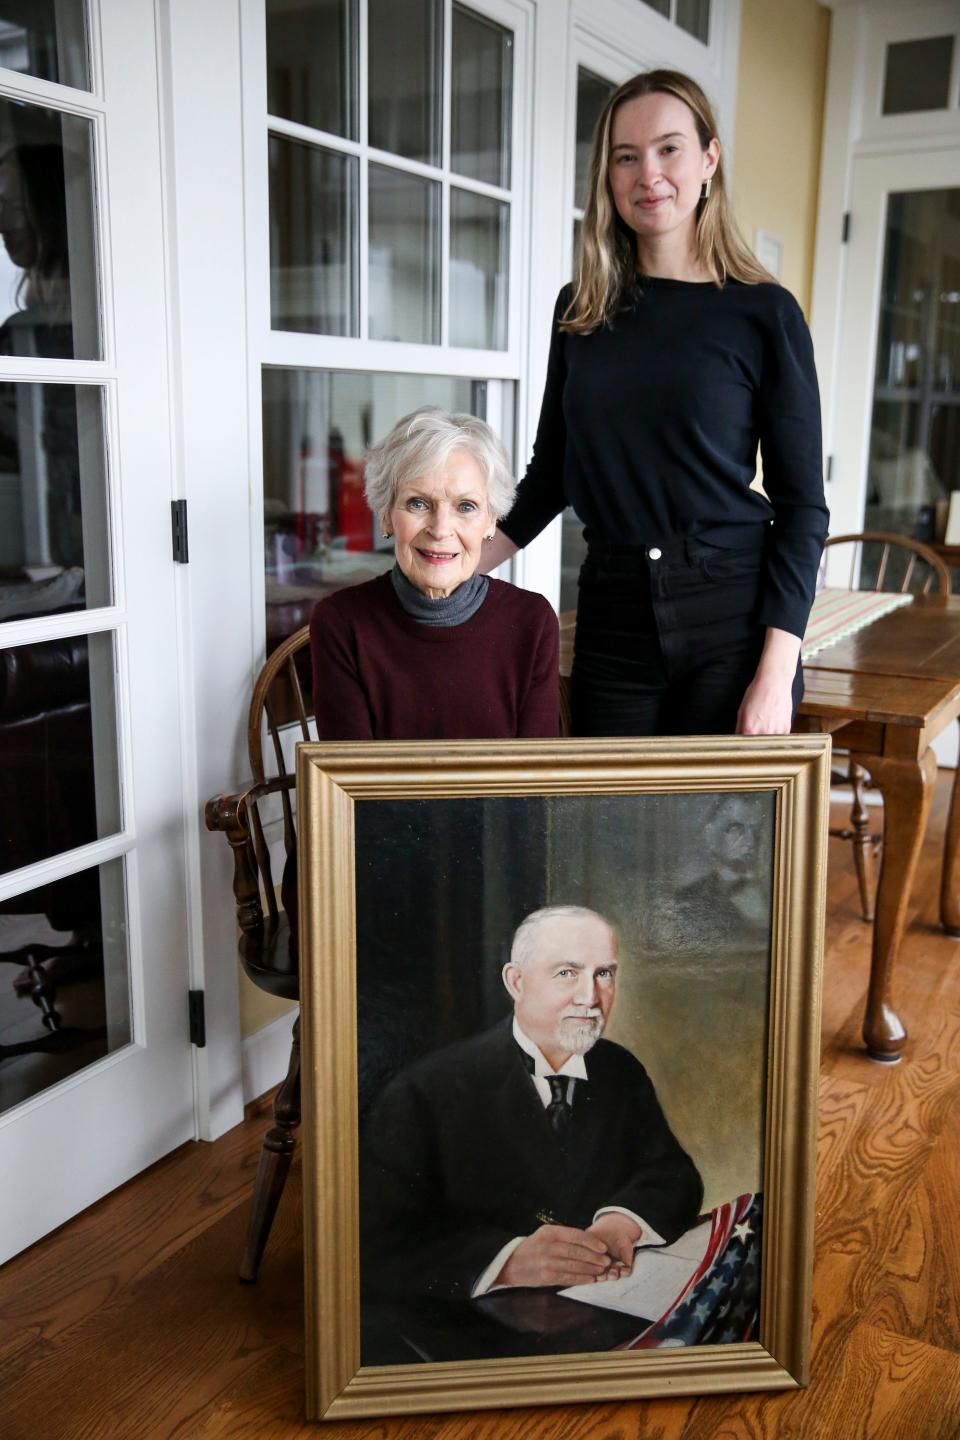 Kathy and Claire Withycombe with a portrait of Gov. Withycombe on Thursday, Nov. 11, 2021, in Hillsboro, Ore.